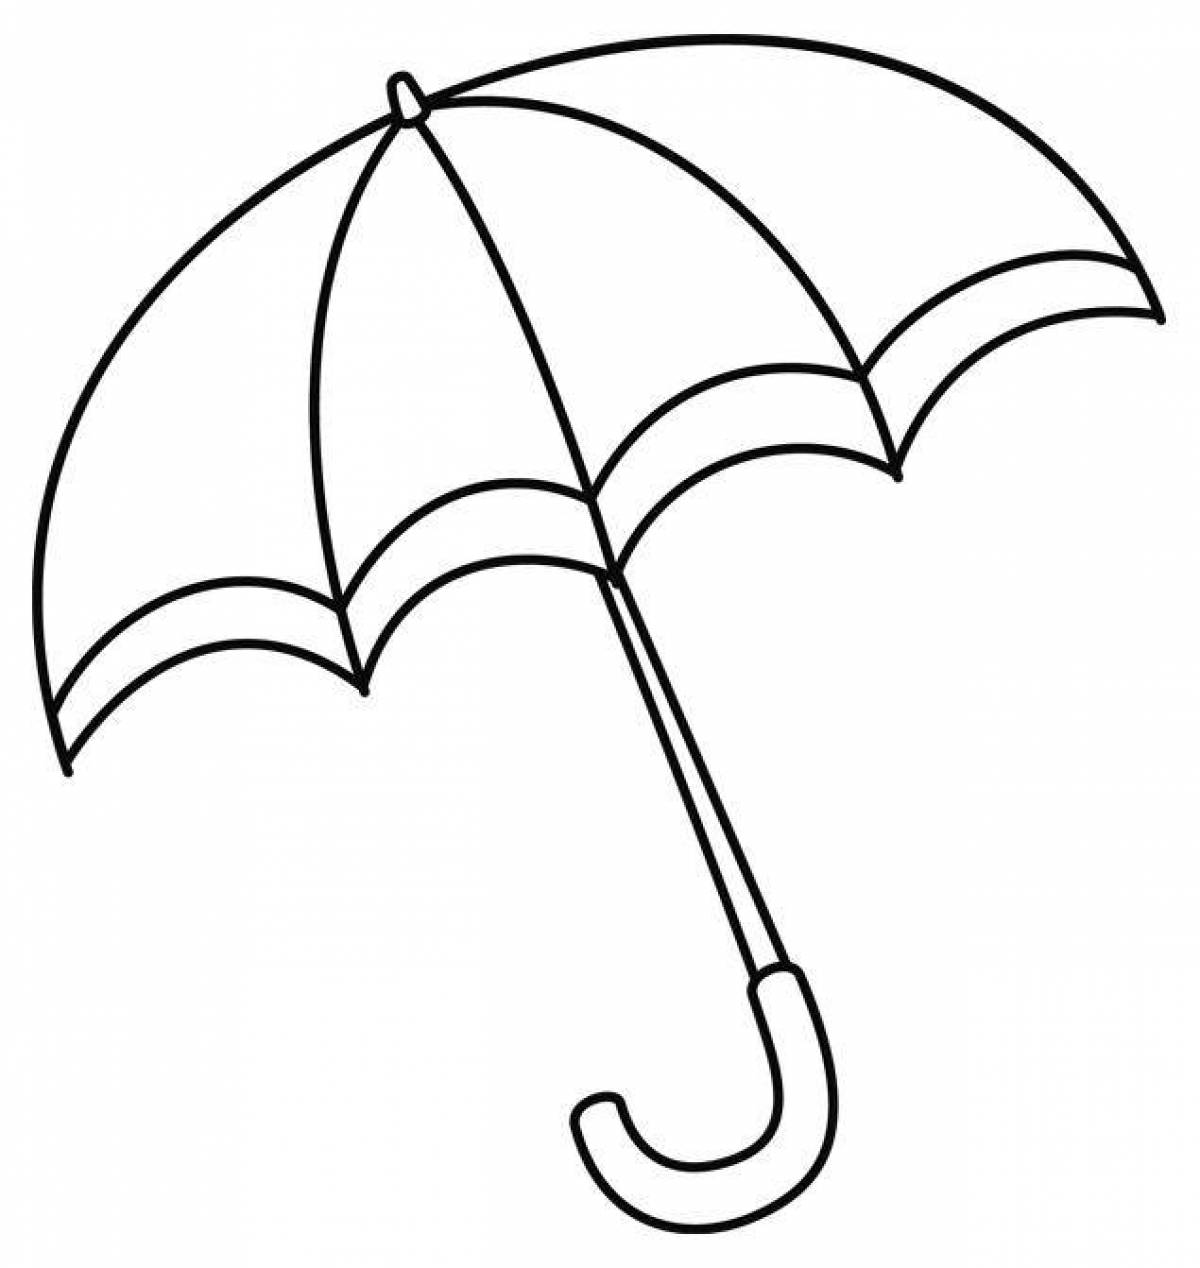 Colorful and bright umbrella coloring book for kids